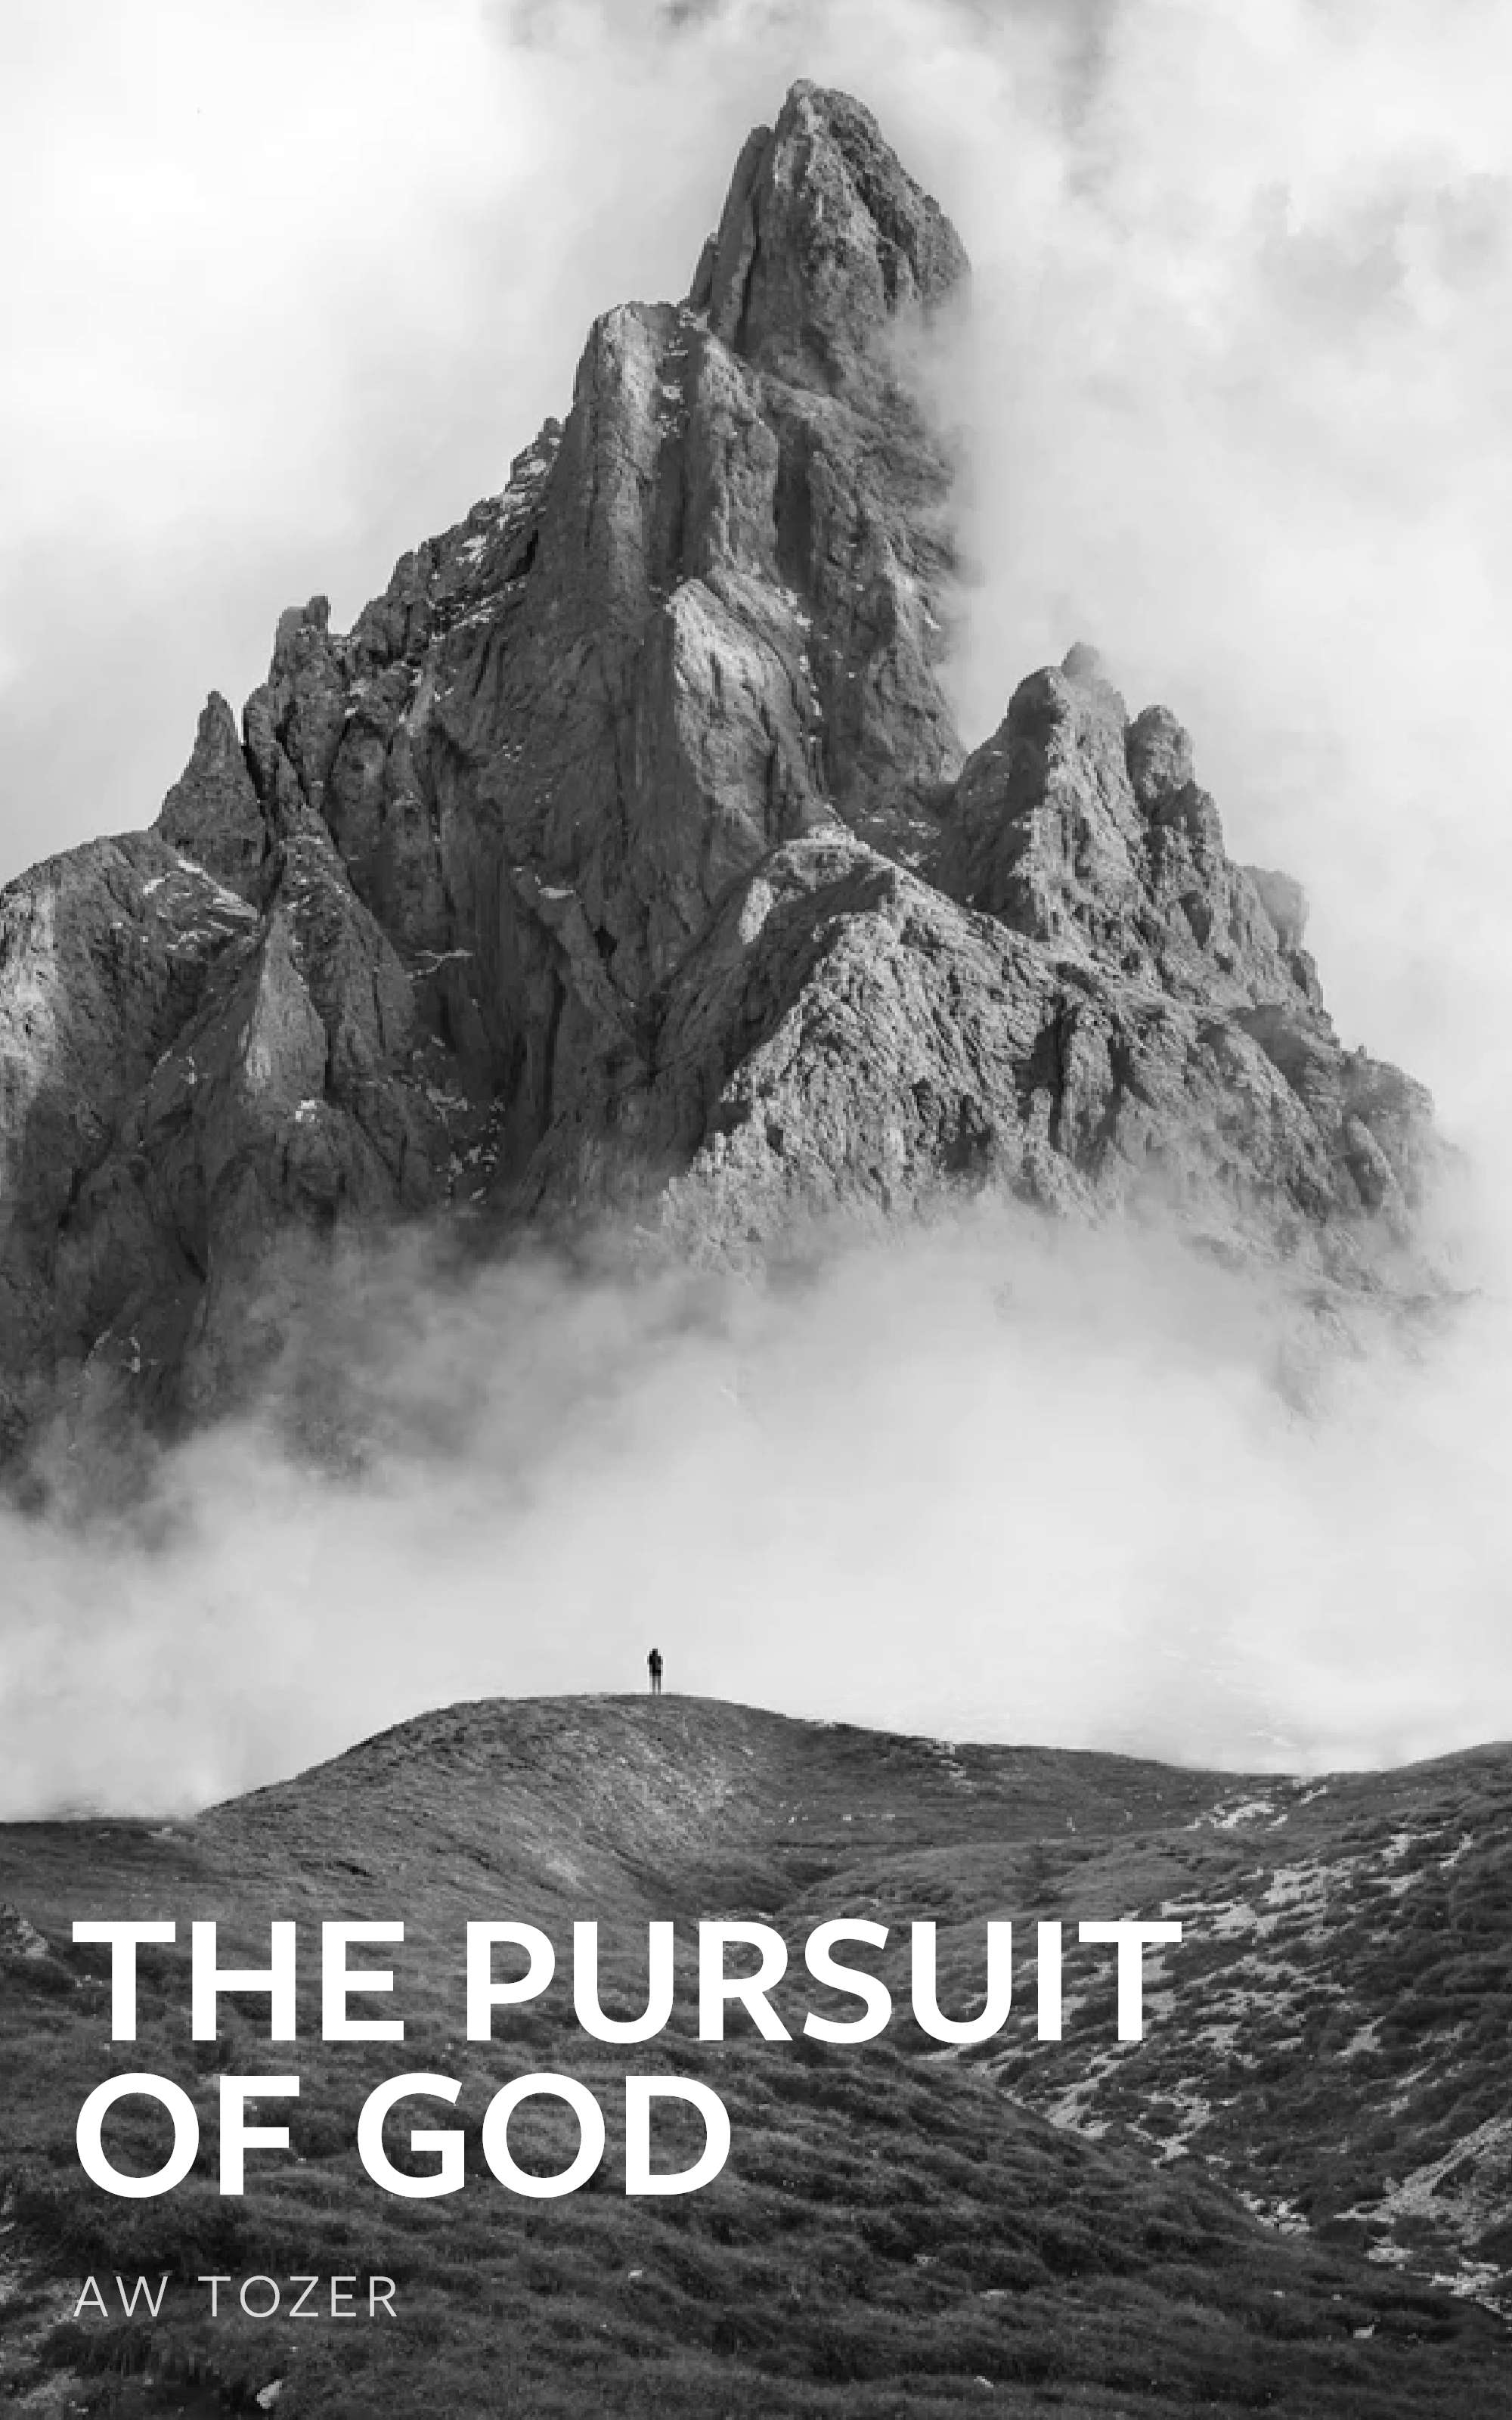 Book cover for The Pursuit of God, by A.W. Tozer, shows a person standing in front of a large mountain enshrouded in clouds